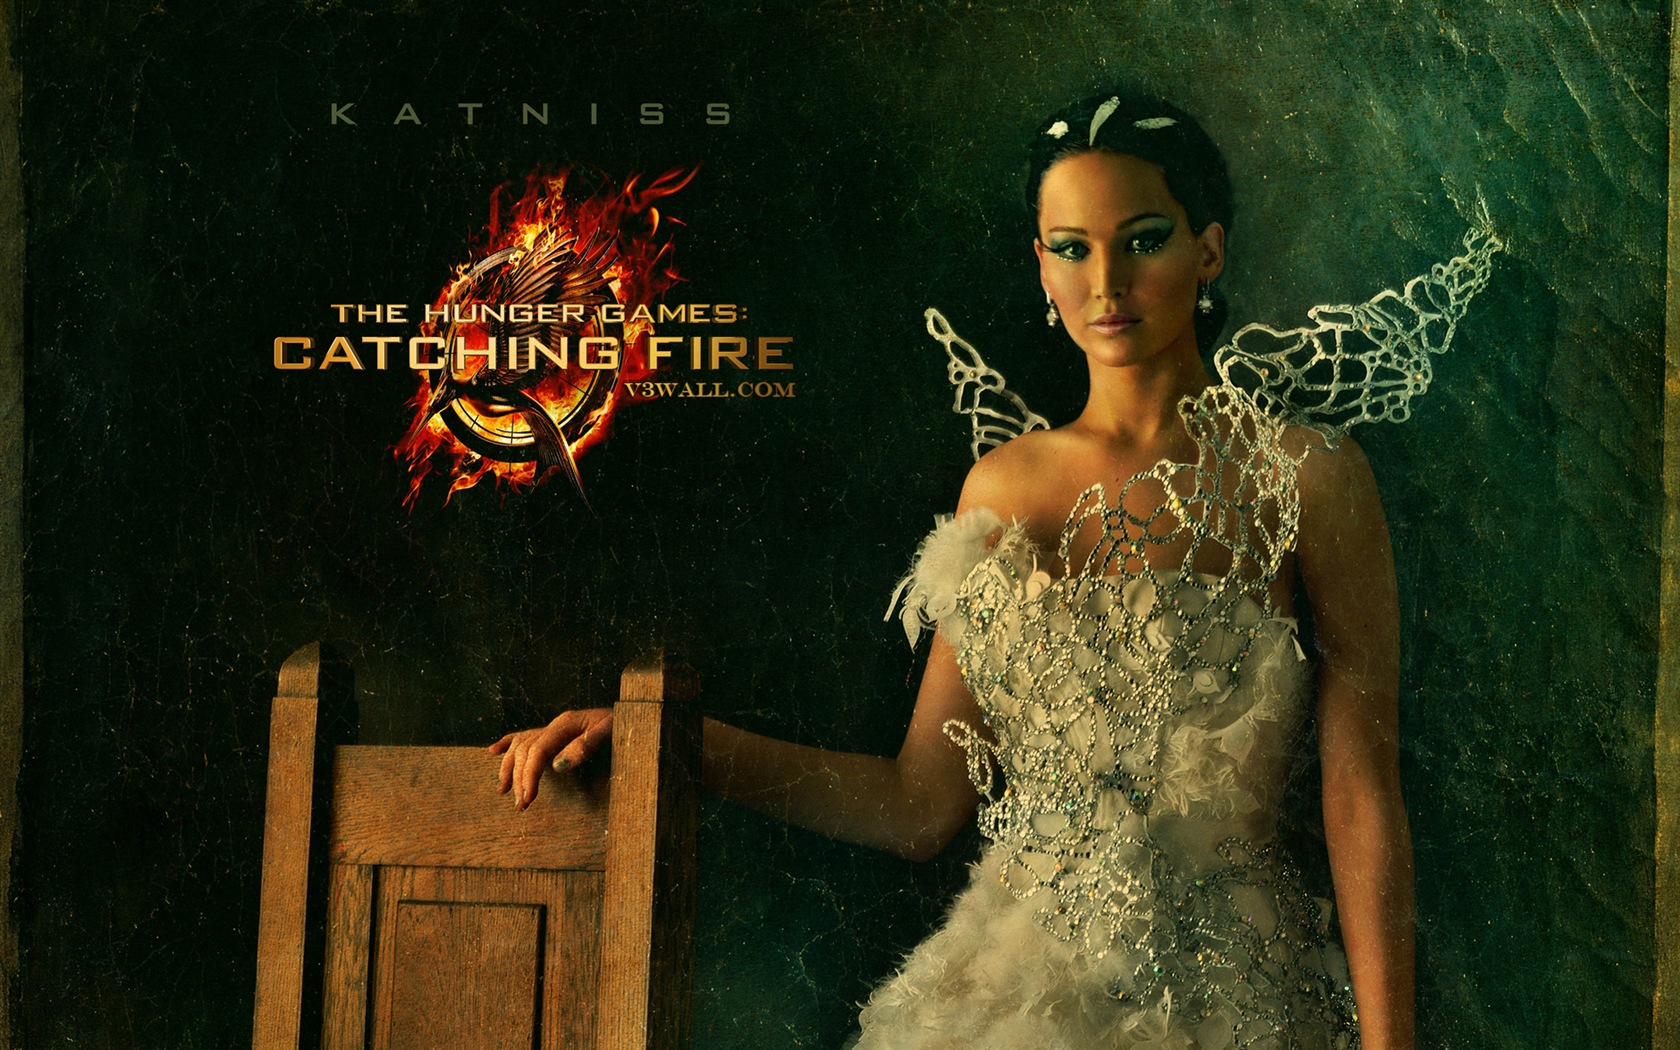 The Hunger Games: Catching Fire wallpapers HD #13 - 1680x1050